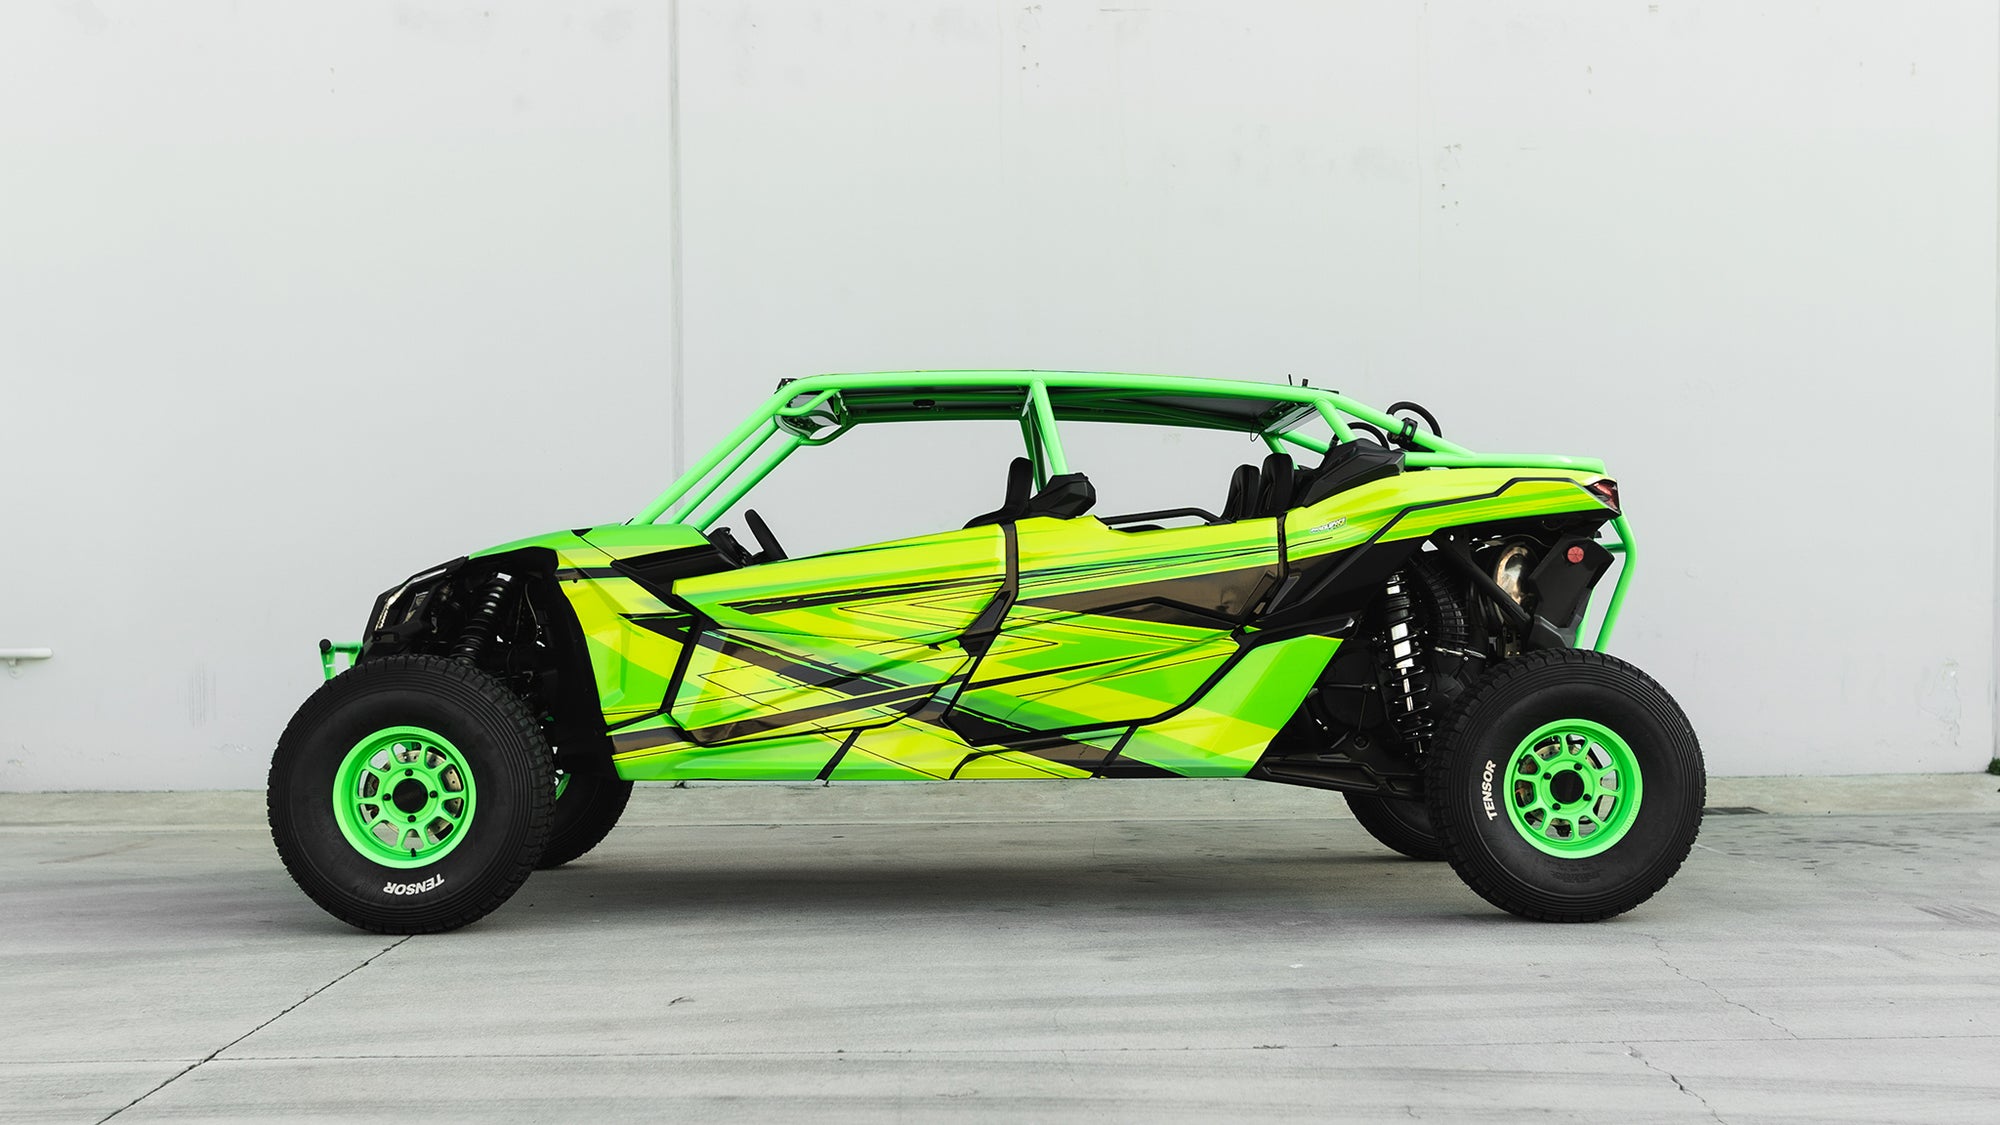 Canam X3 with a Twist of Lime!